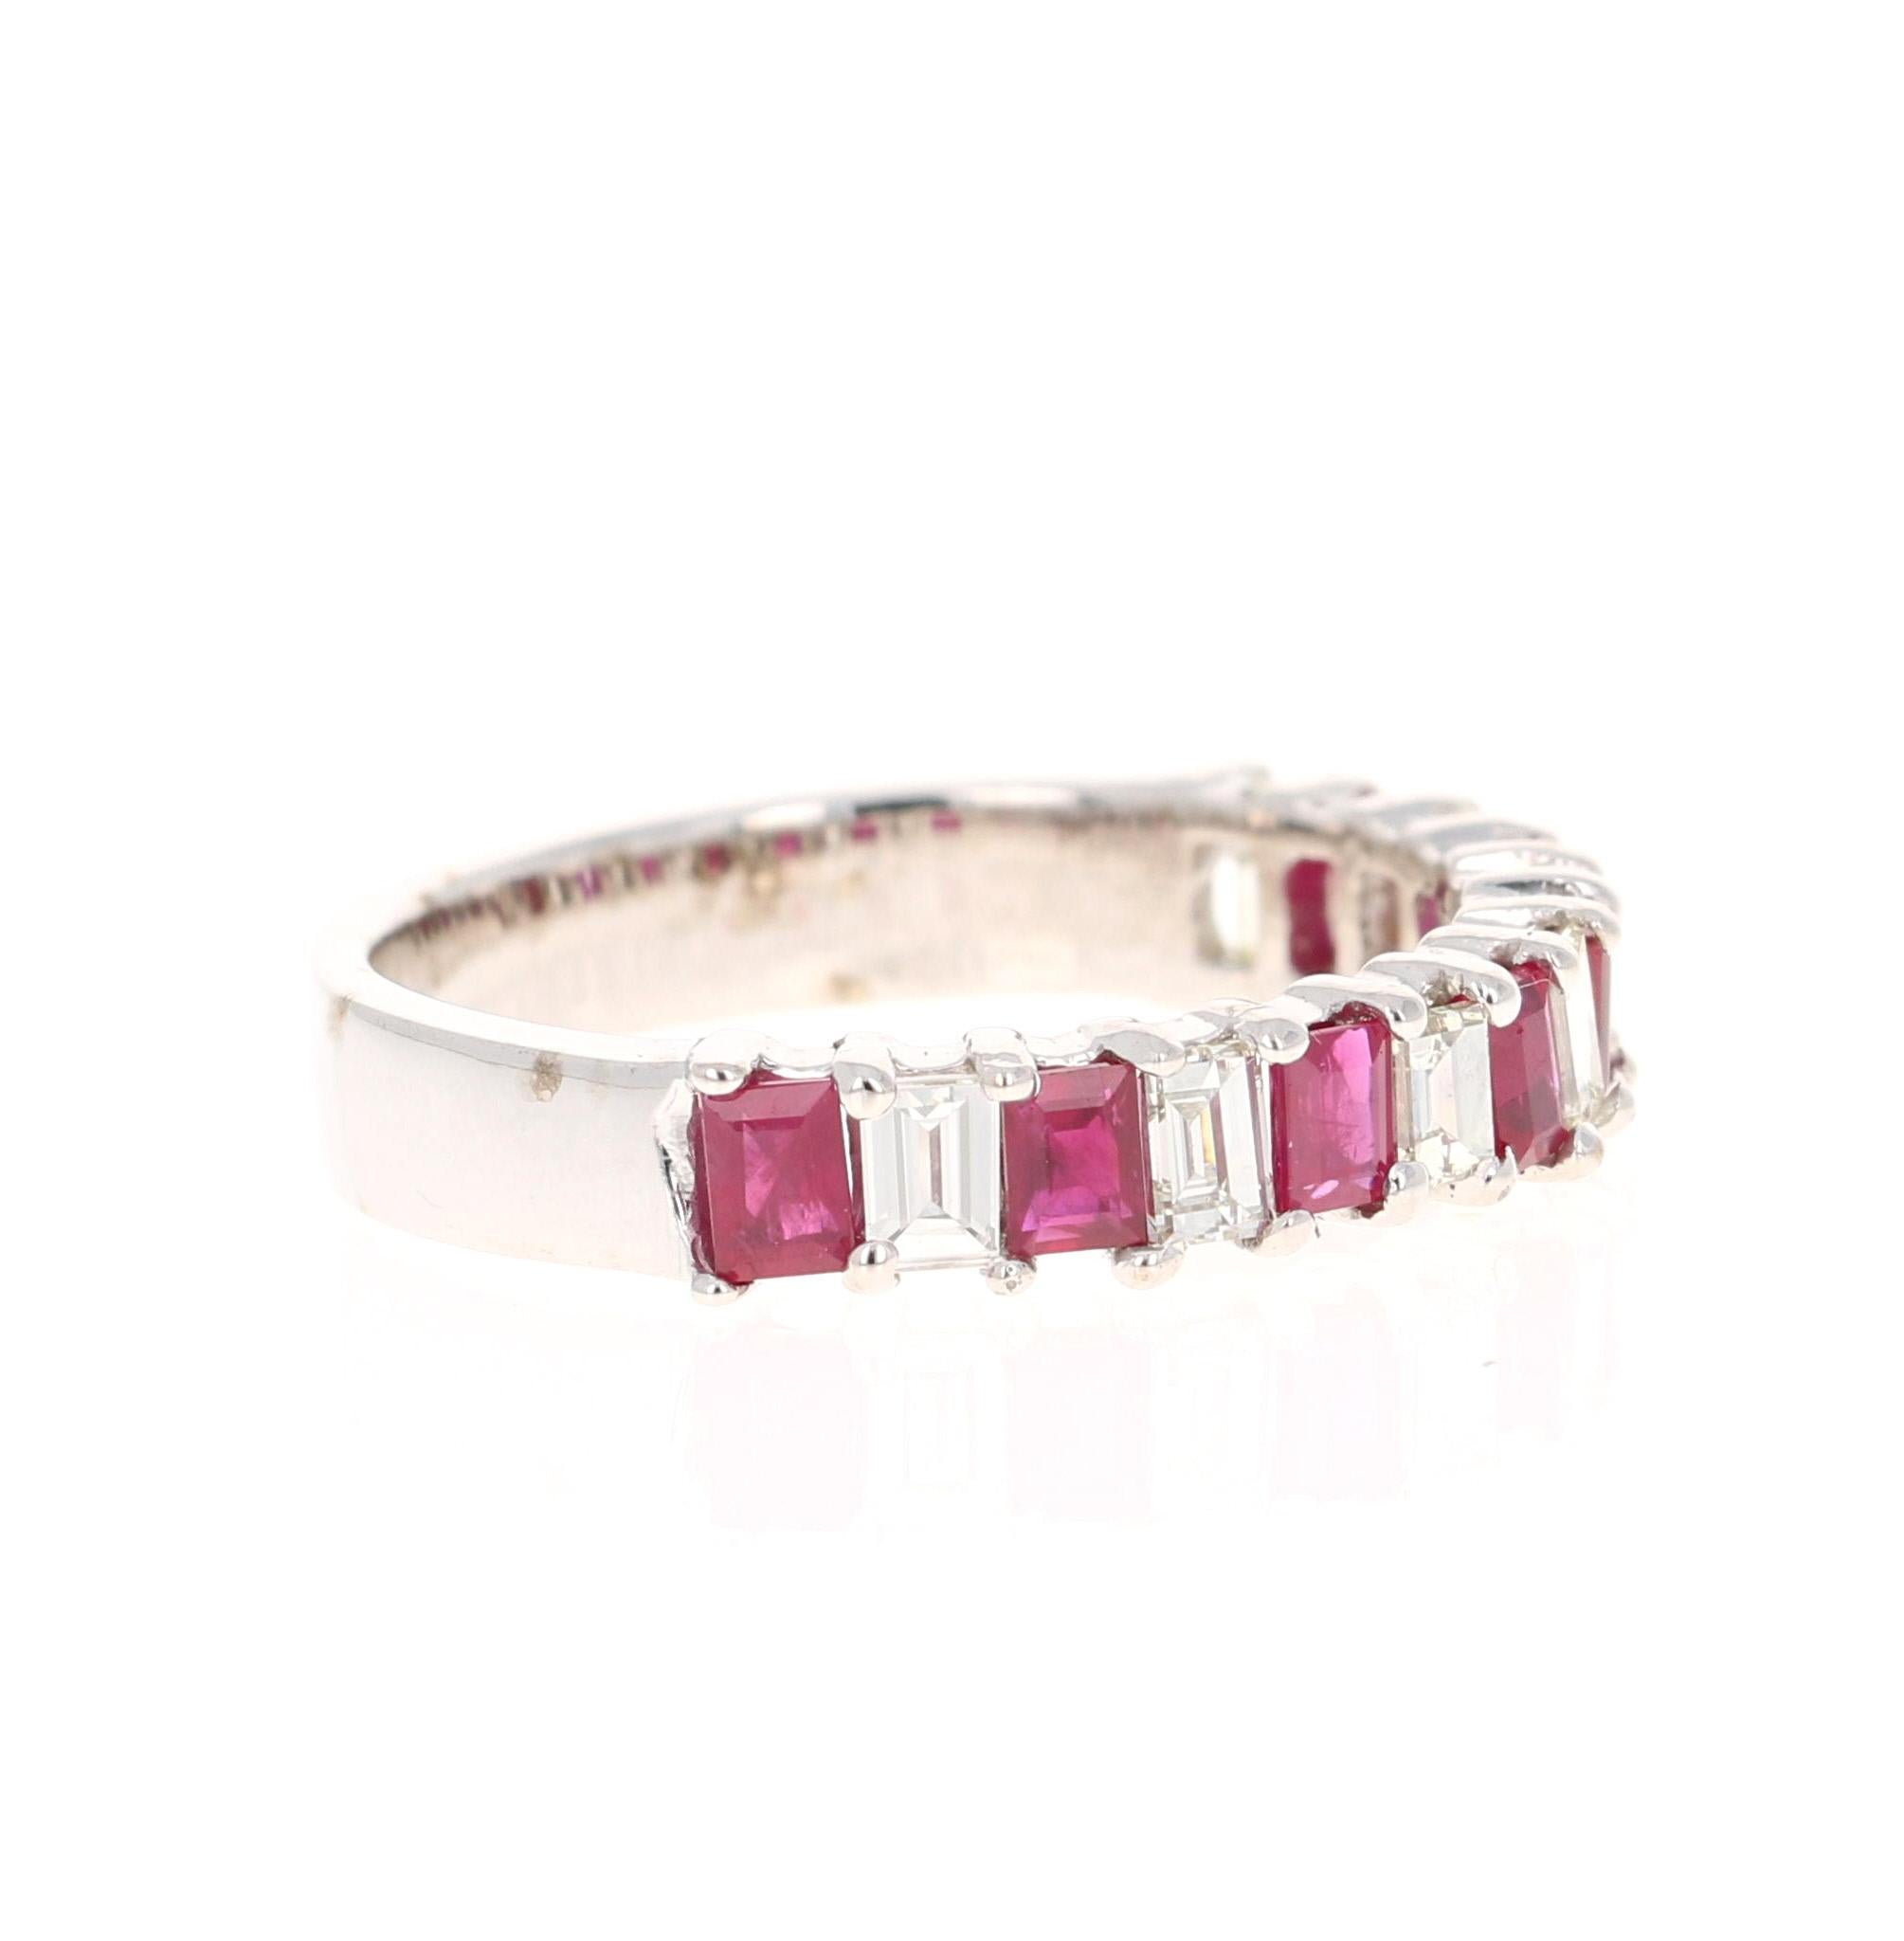 A gorgeous Ruby and Diamond Band! A daily and dazzling stunner! 

This ring has 7 Baguette Cut Diamonds that weigh 0.69 Carats and 7 Rubies that weigh 1.00 Carat with a clarity and color of VS-H. 

The ring is casted in 18K White Gold and weighs